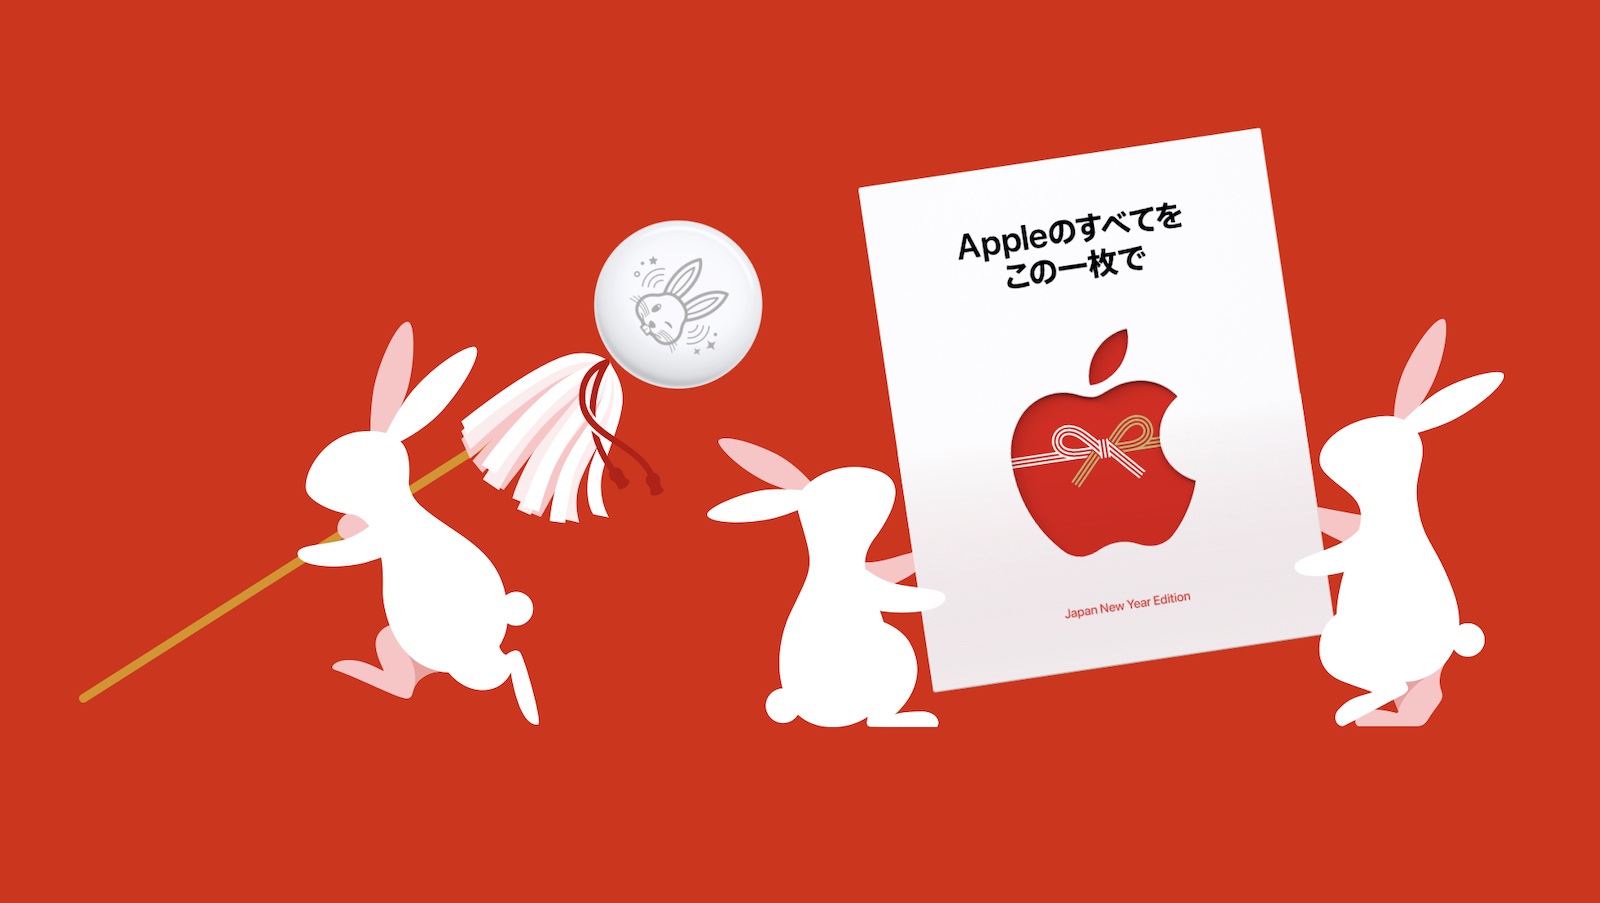 Apple Announces Japanese New Year Promotion With Limited-Edition AirTag